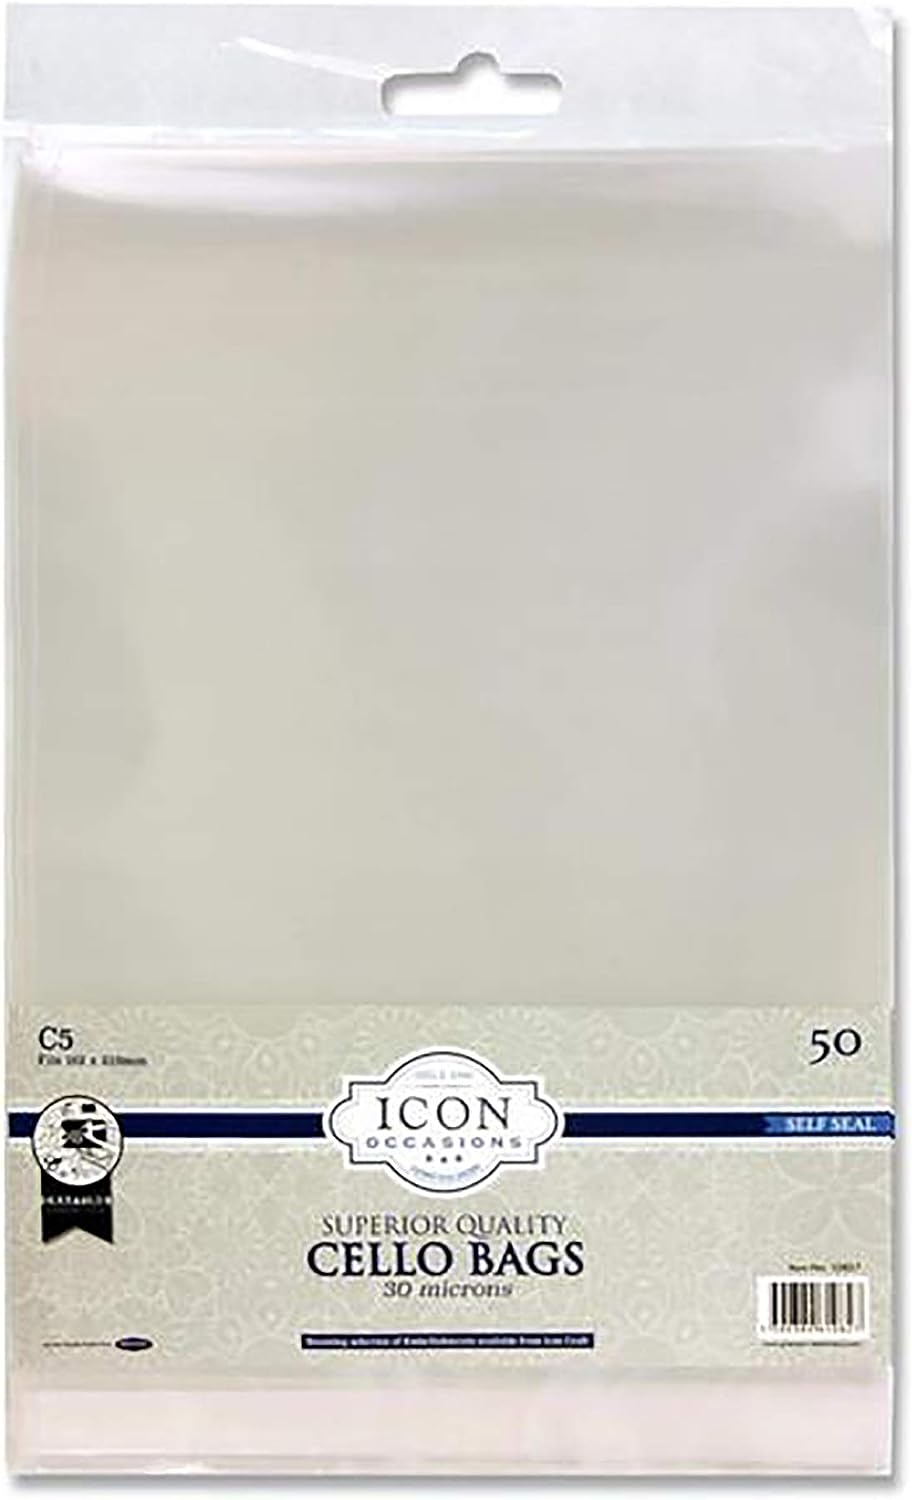 Premier Stationery Icon C5 Self Seal Cello Bags Pack of 50 RRP £4.50 CLEARANCE XL £3.99